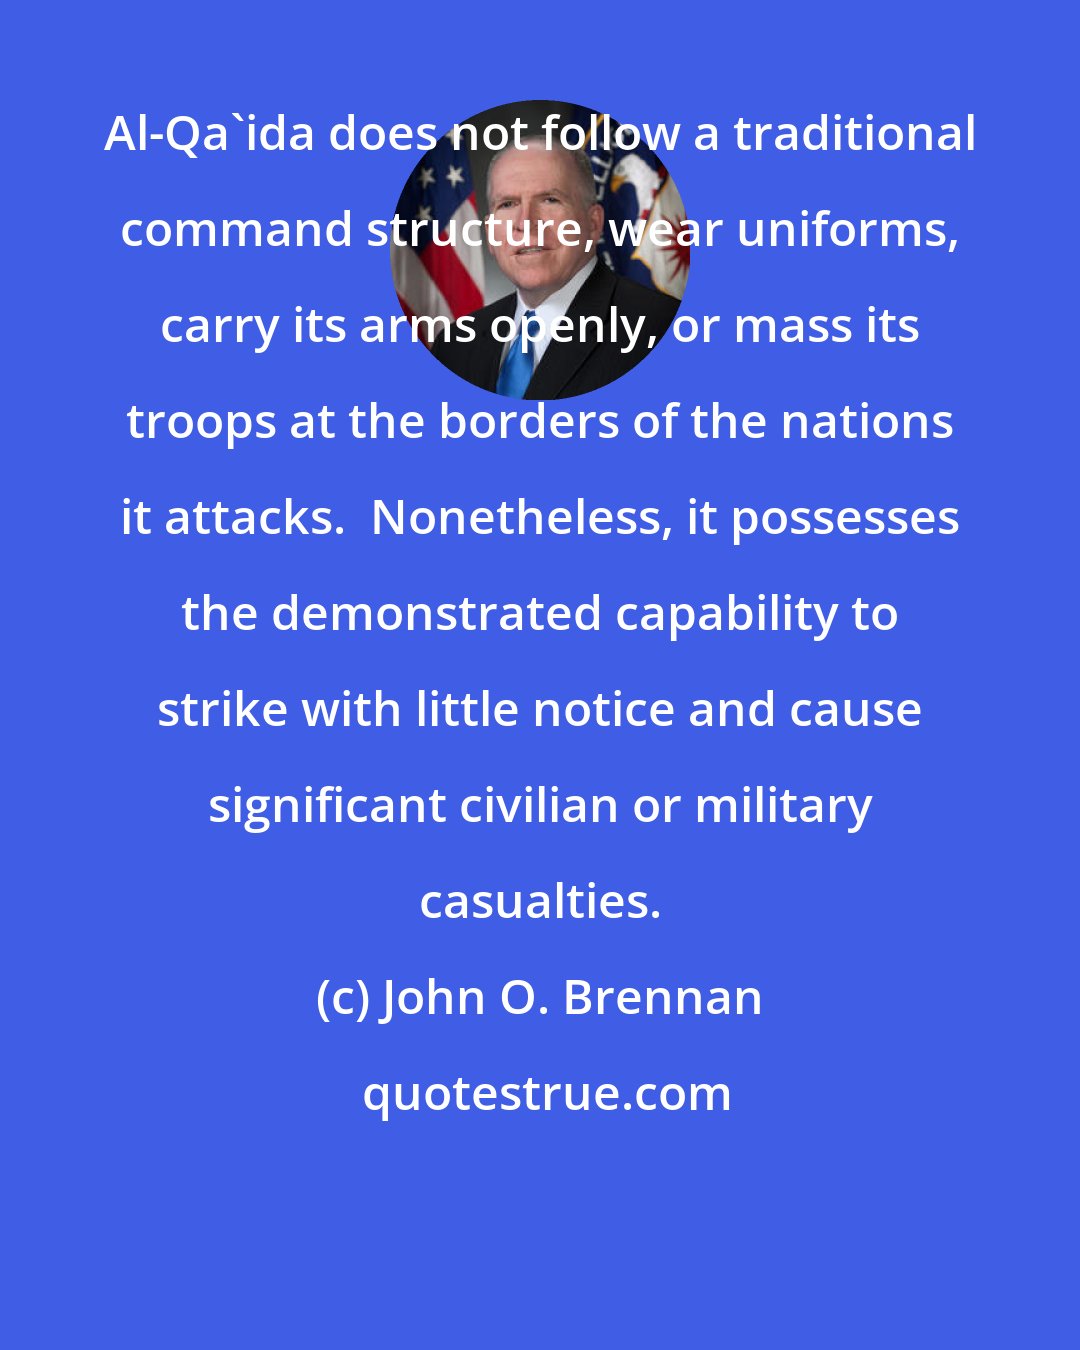 John O. Brennan: Al-Qa'ida does not follow a traditional command structure, wear uniforms, carry its arms openly, or mass its troops at the borders of the nations it attacks.  Nonetheless, it possesses the demonstrated capability to strike with little notice and cause significant civilian or military casualties.